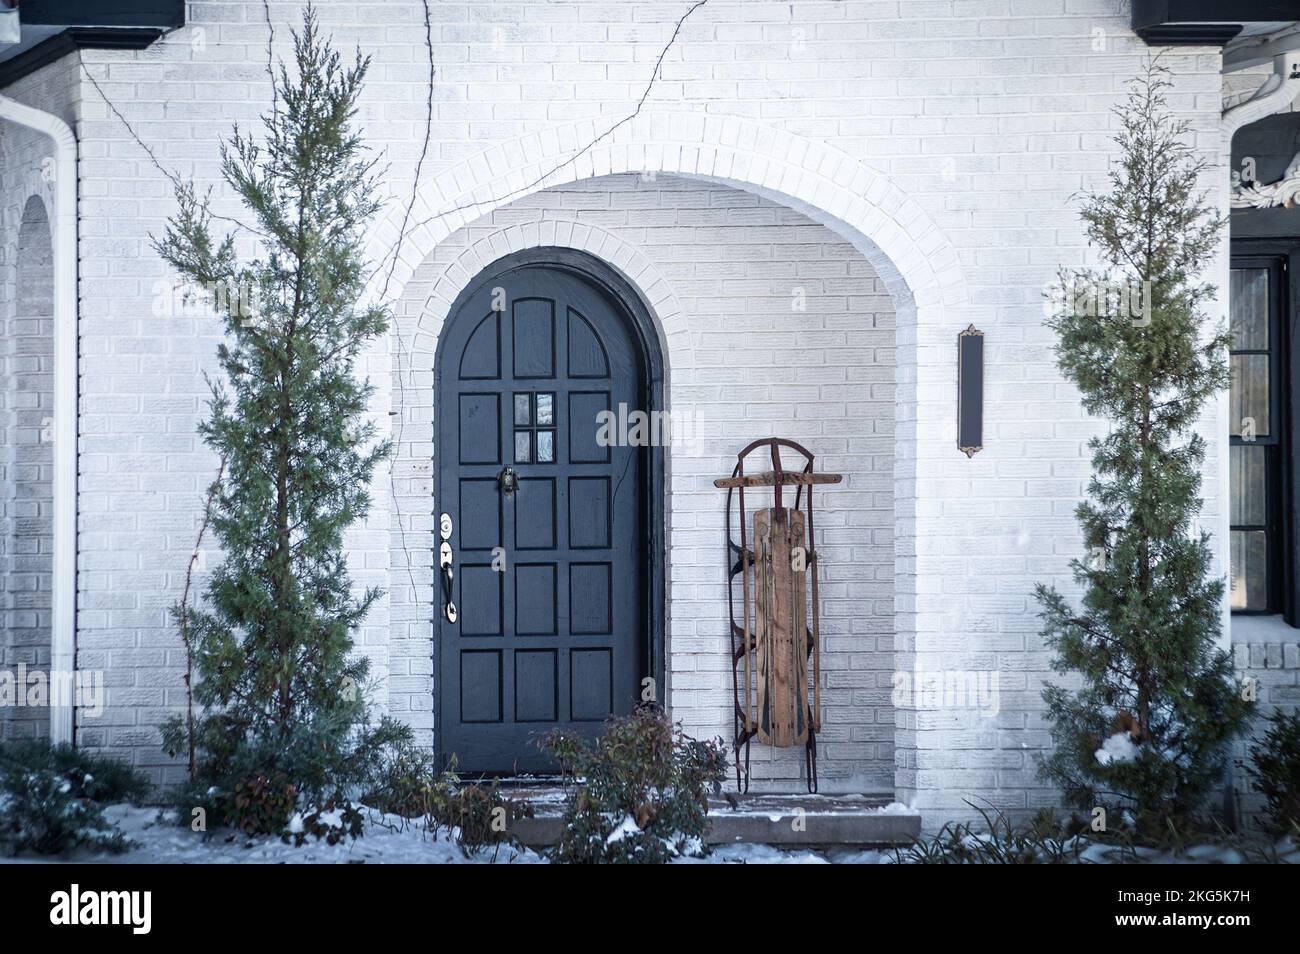 Snow Day - Porch of white painted brick house with arched front door and sled propped up nearby - Evergreen trees to each side Stock Photo